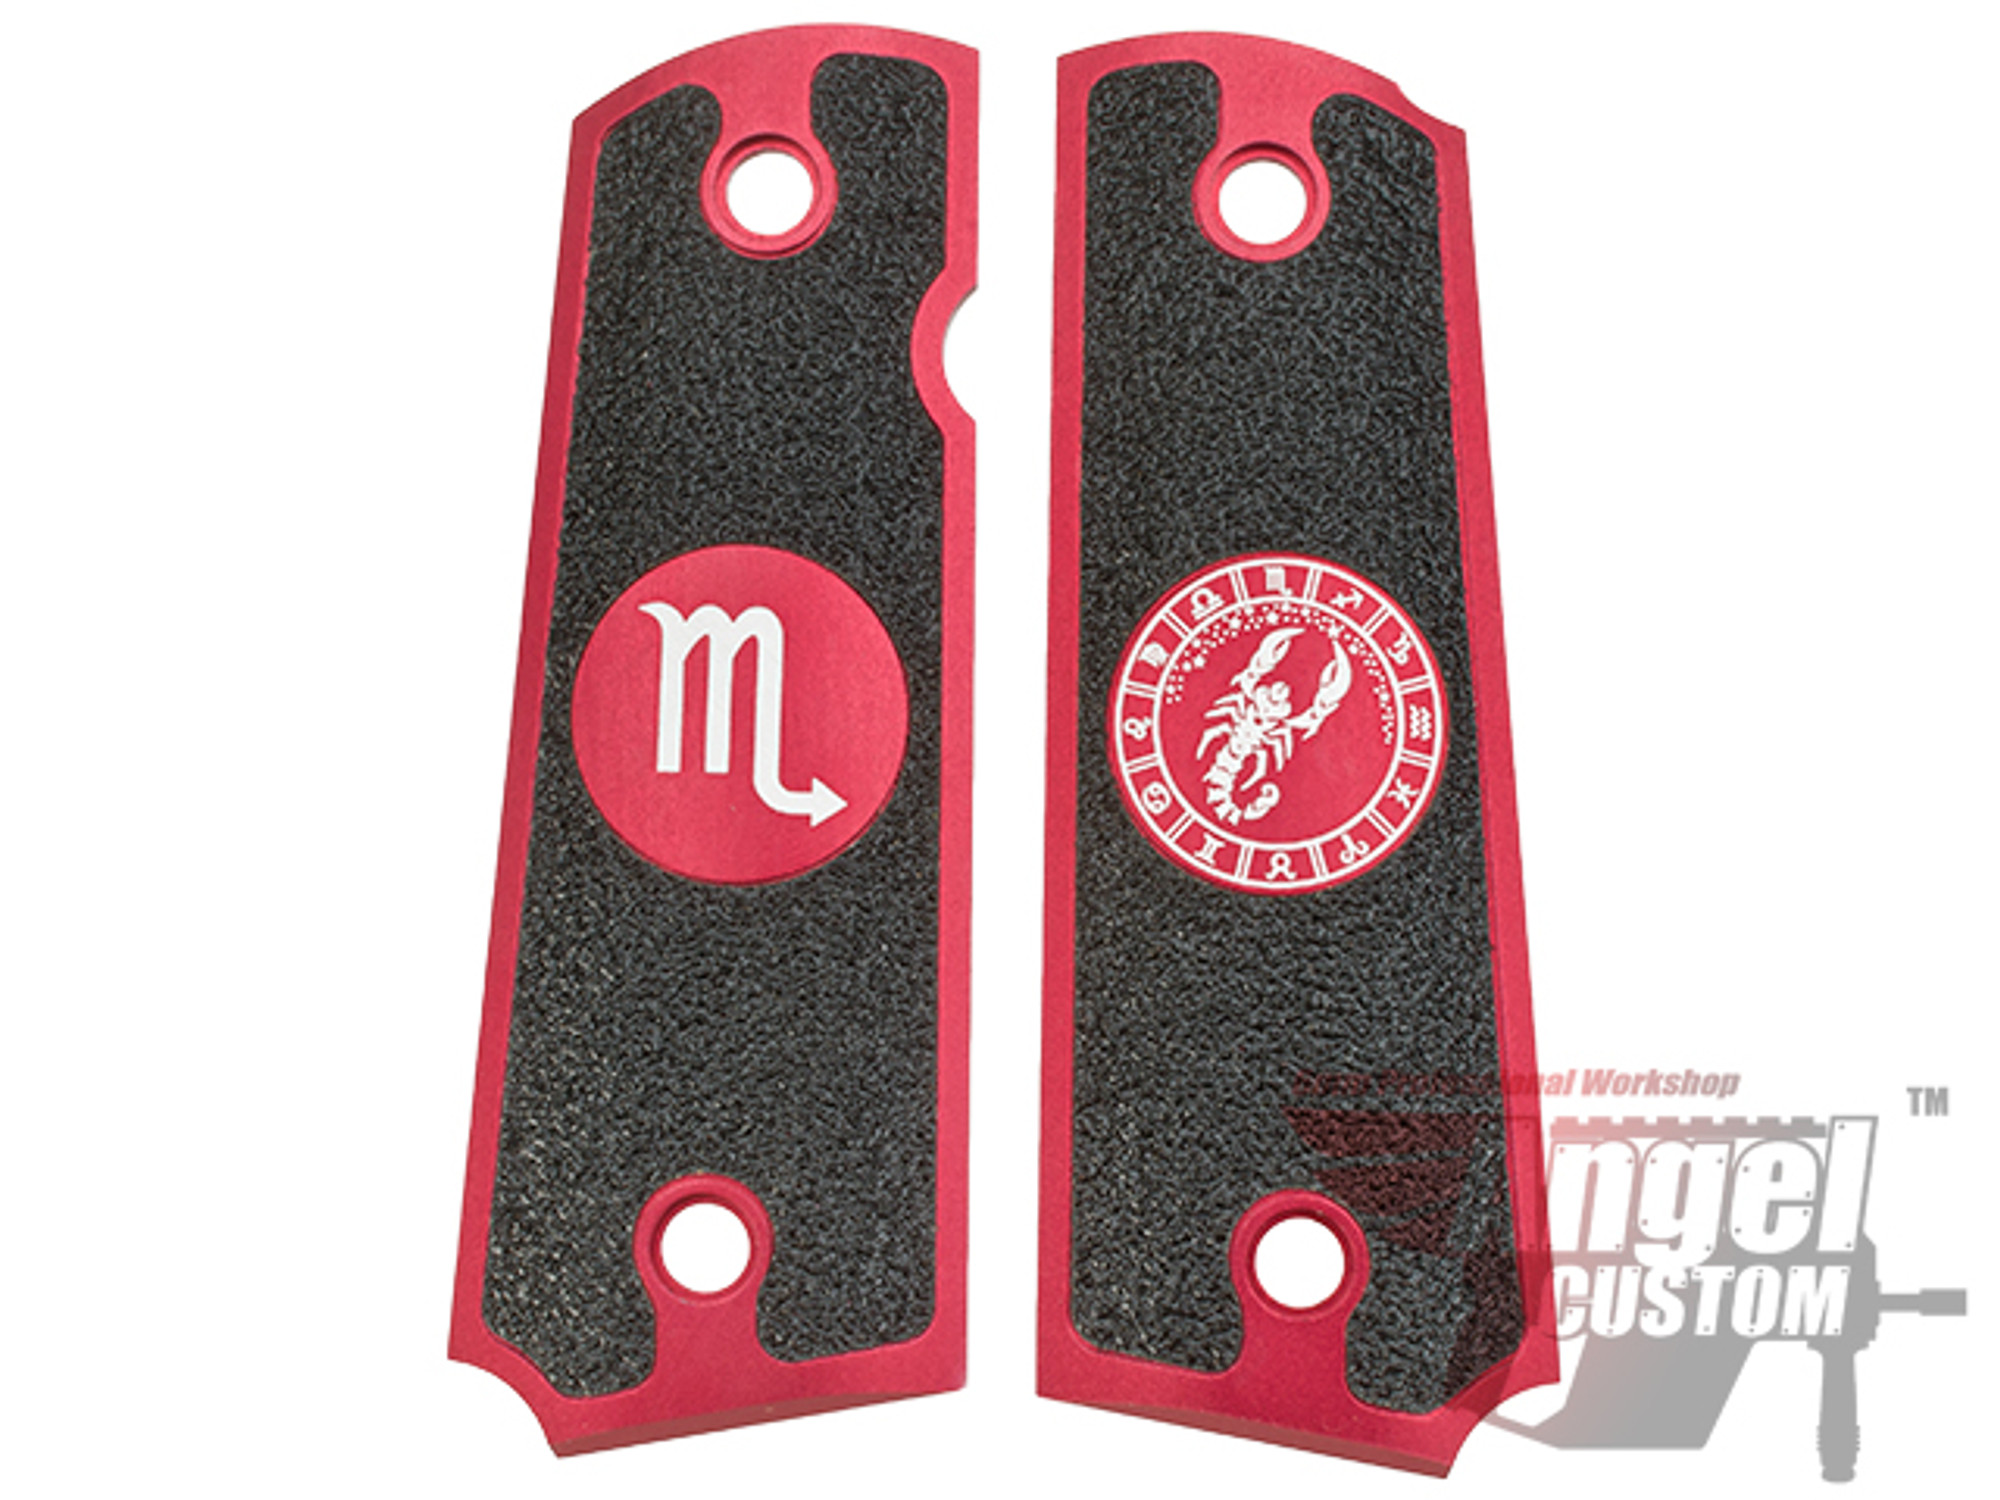 Angel Custom CNC Machined Tac-Glove "Zodiac" Grips for Tokyo Marui/KWA/Western Arms 1911 Series Airsoft Pistols - Red (Sign: Scorpio)